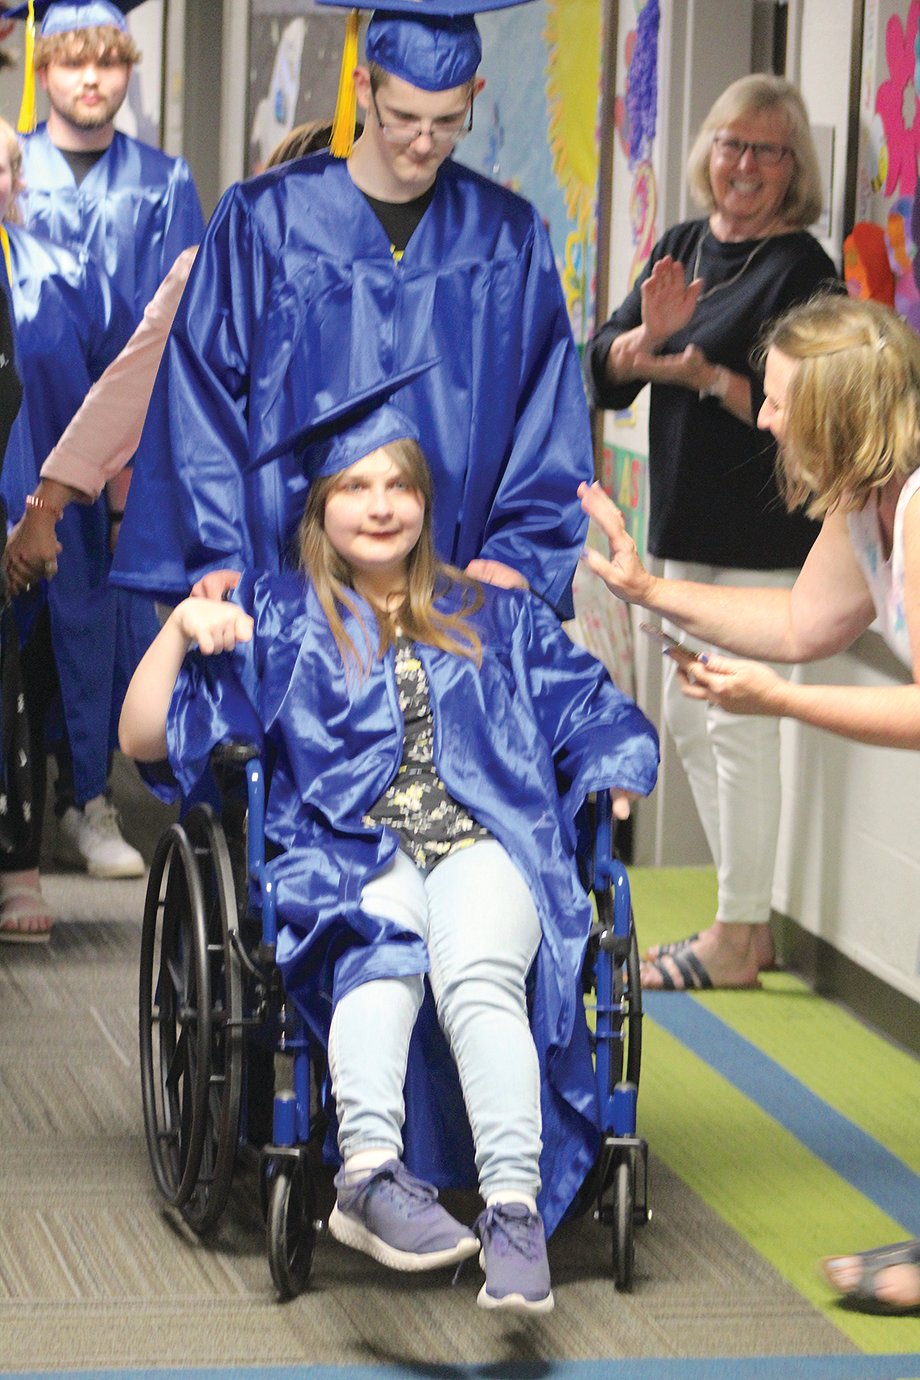 Athenian senior Bailey Lowe-Harwood makes her way through the crowd at Hose Elementary, receiving “high fives” and “congratulations” from students and staff along the way.